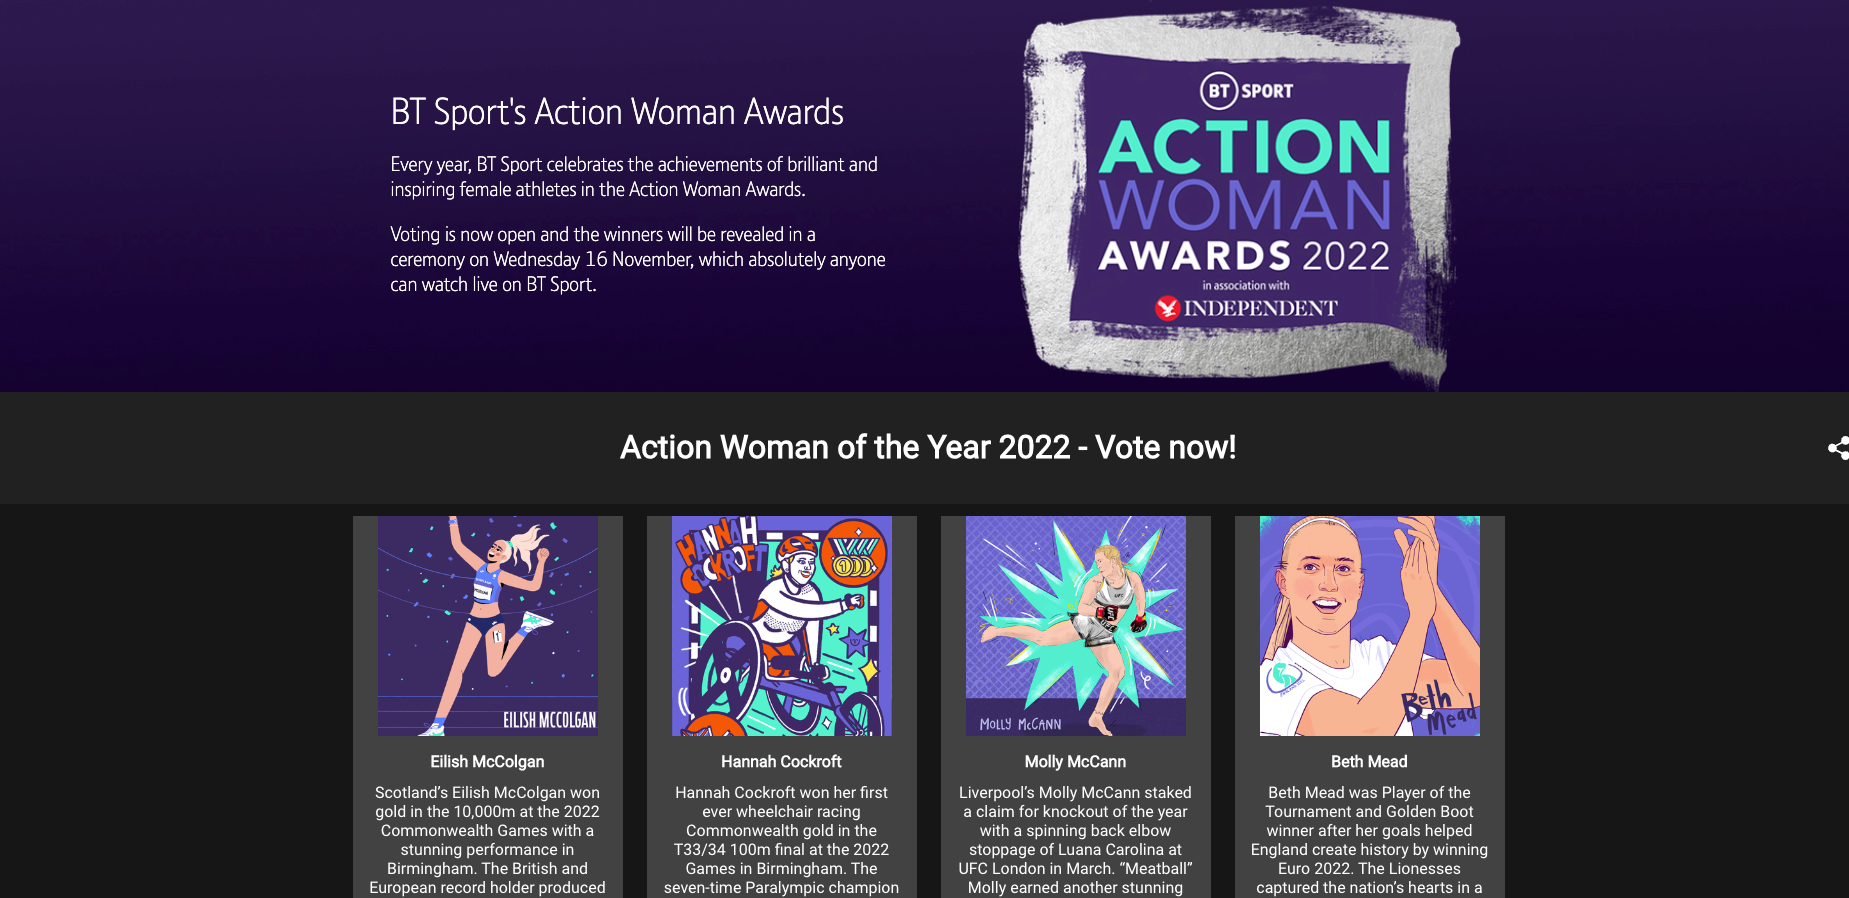 Have your say in BT Sport’s Action Woman Awards by voting here